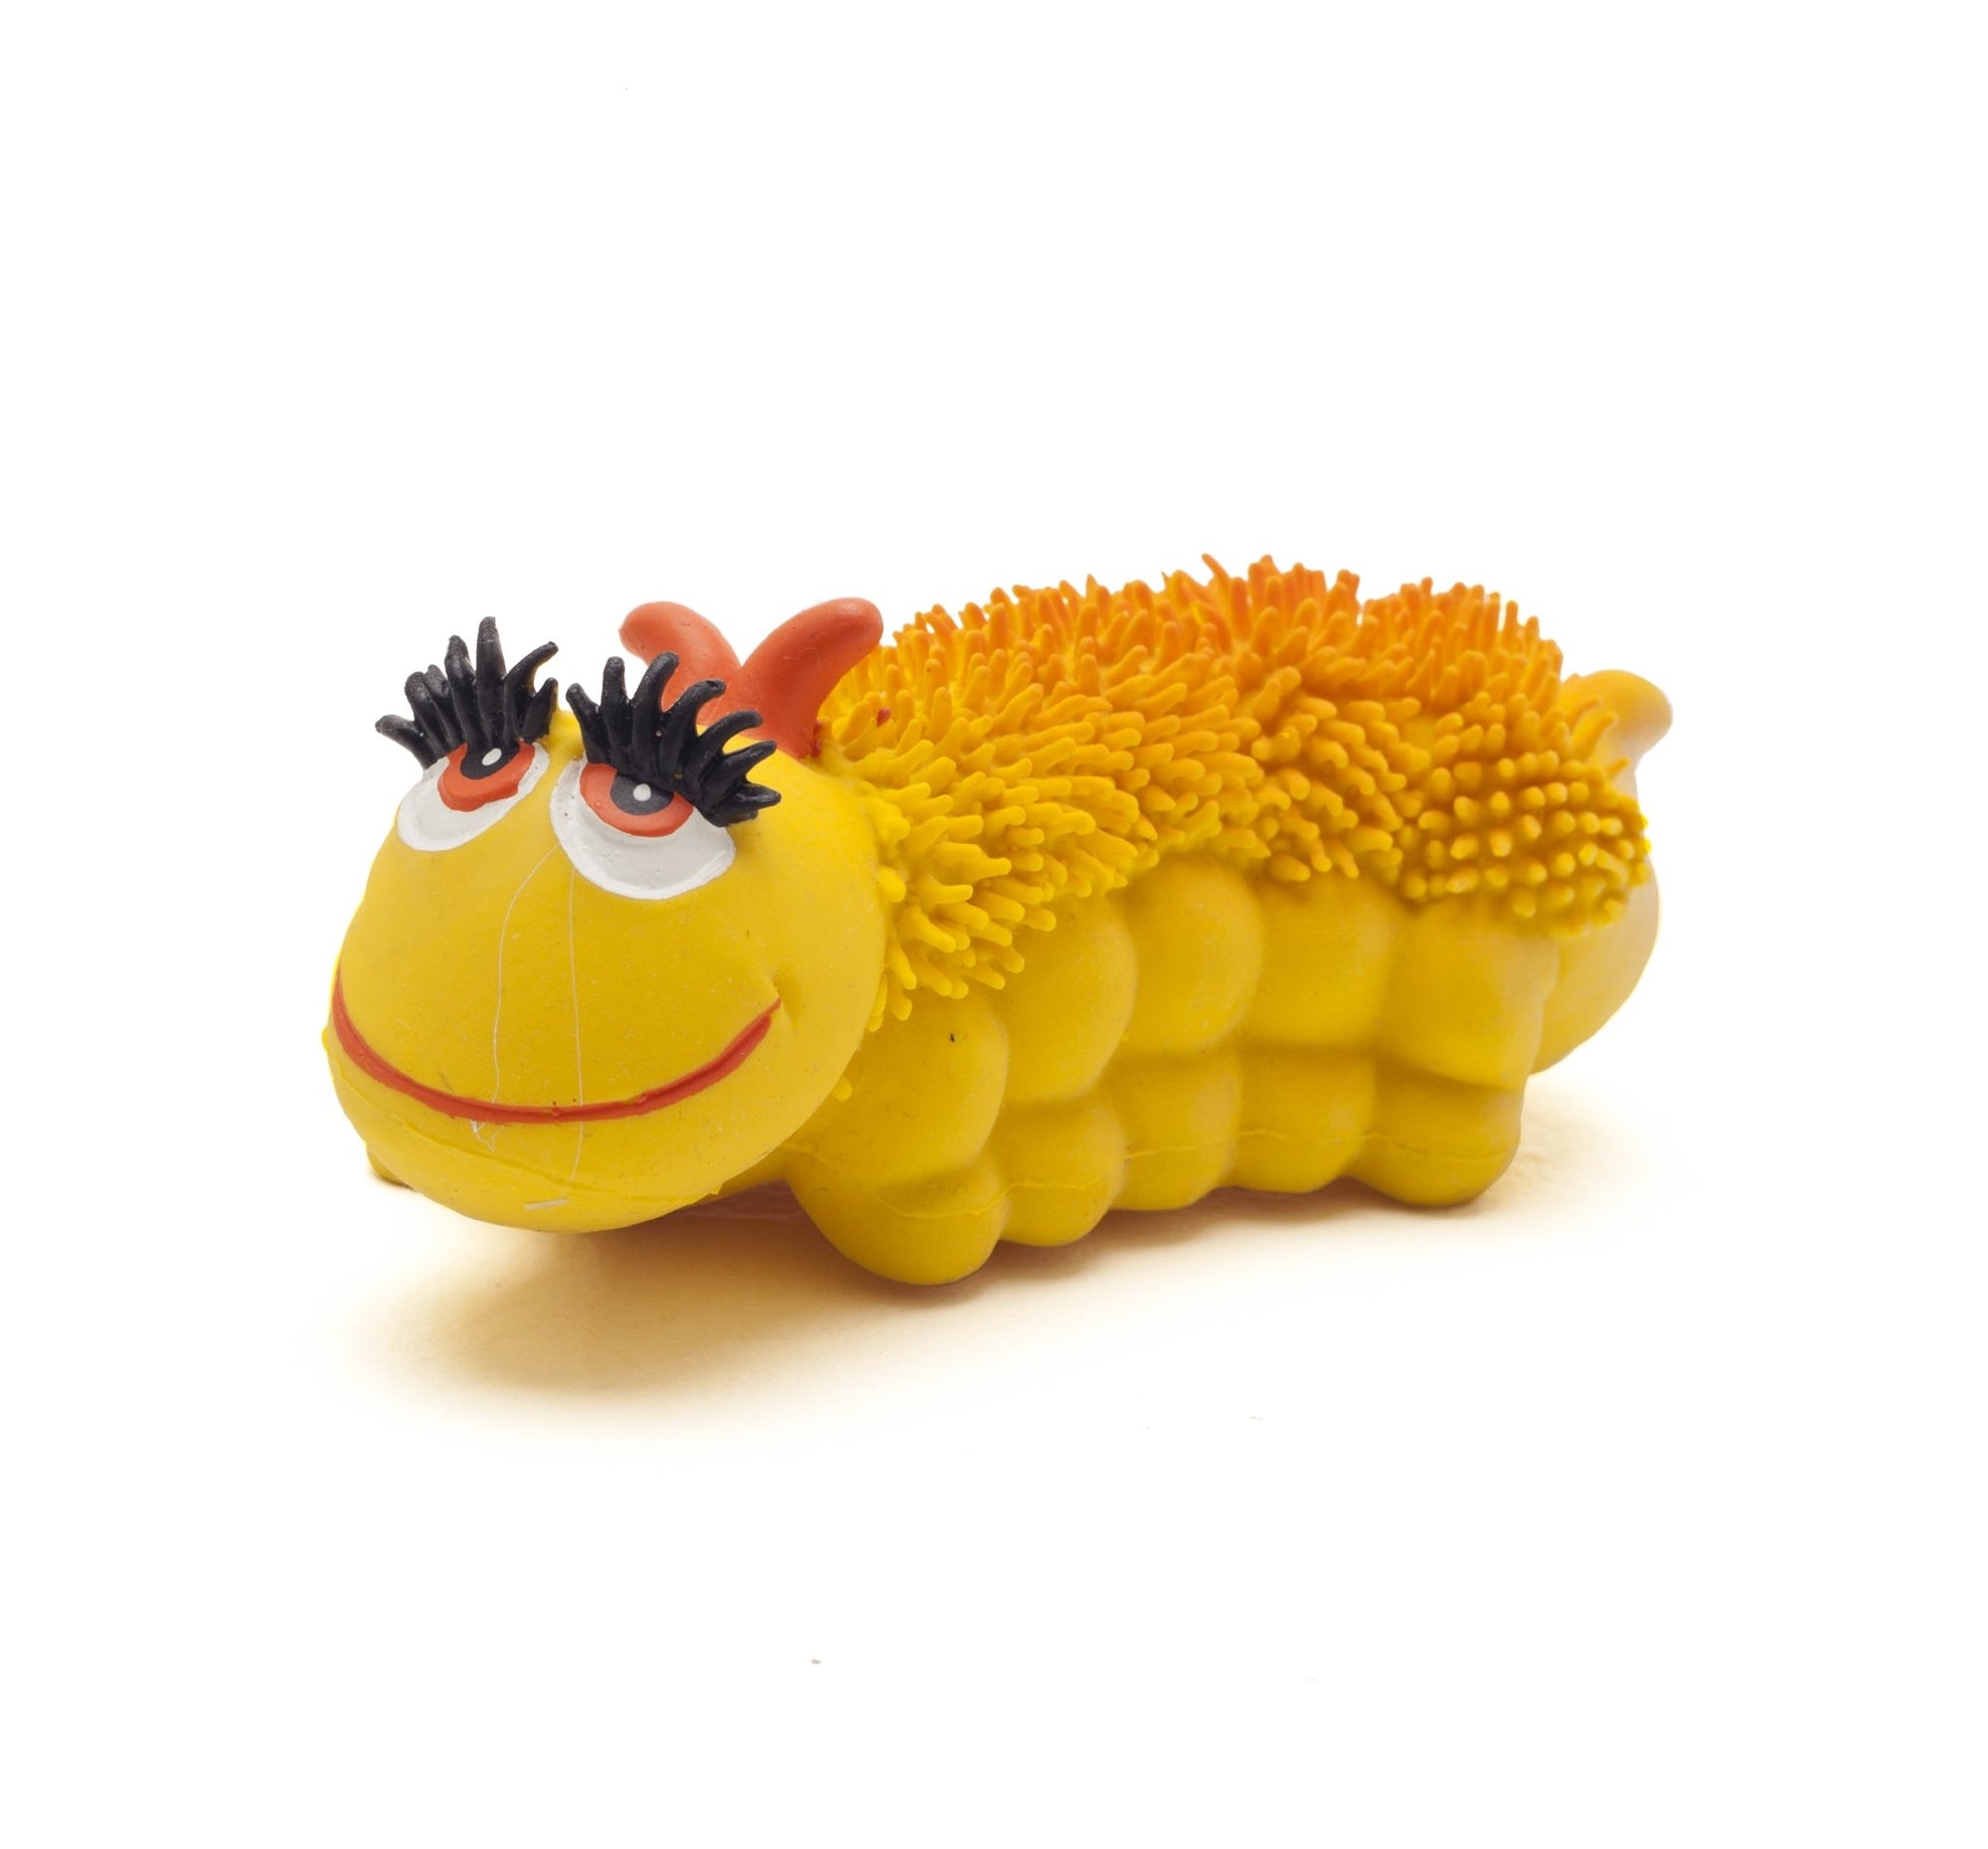 Caterpillar Teething Toy - The Caterpillar Sensory Toy | Natural Rubber Toys